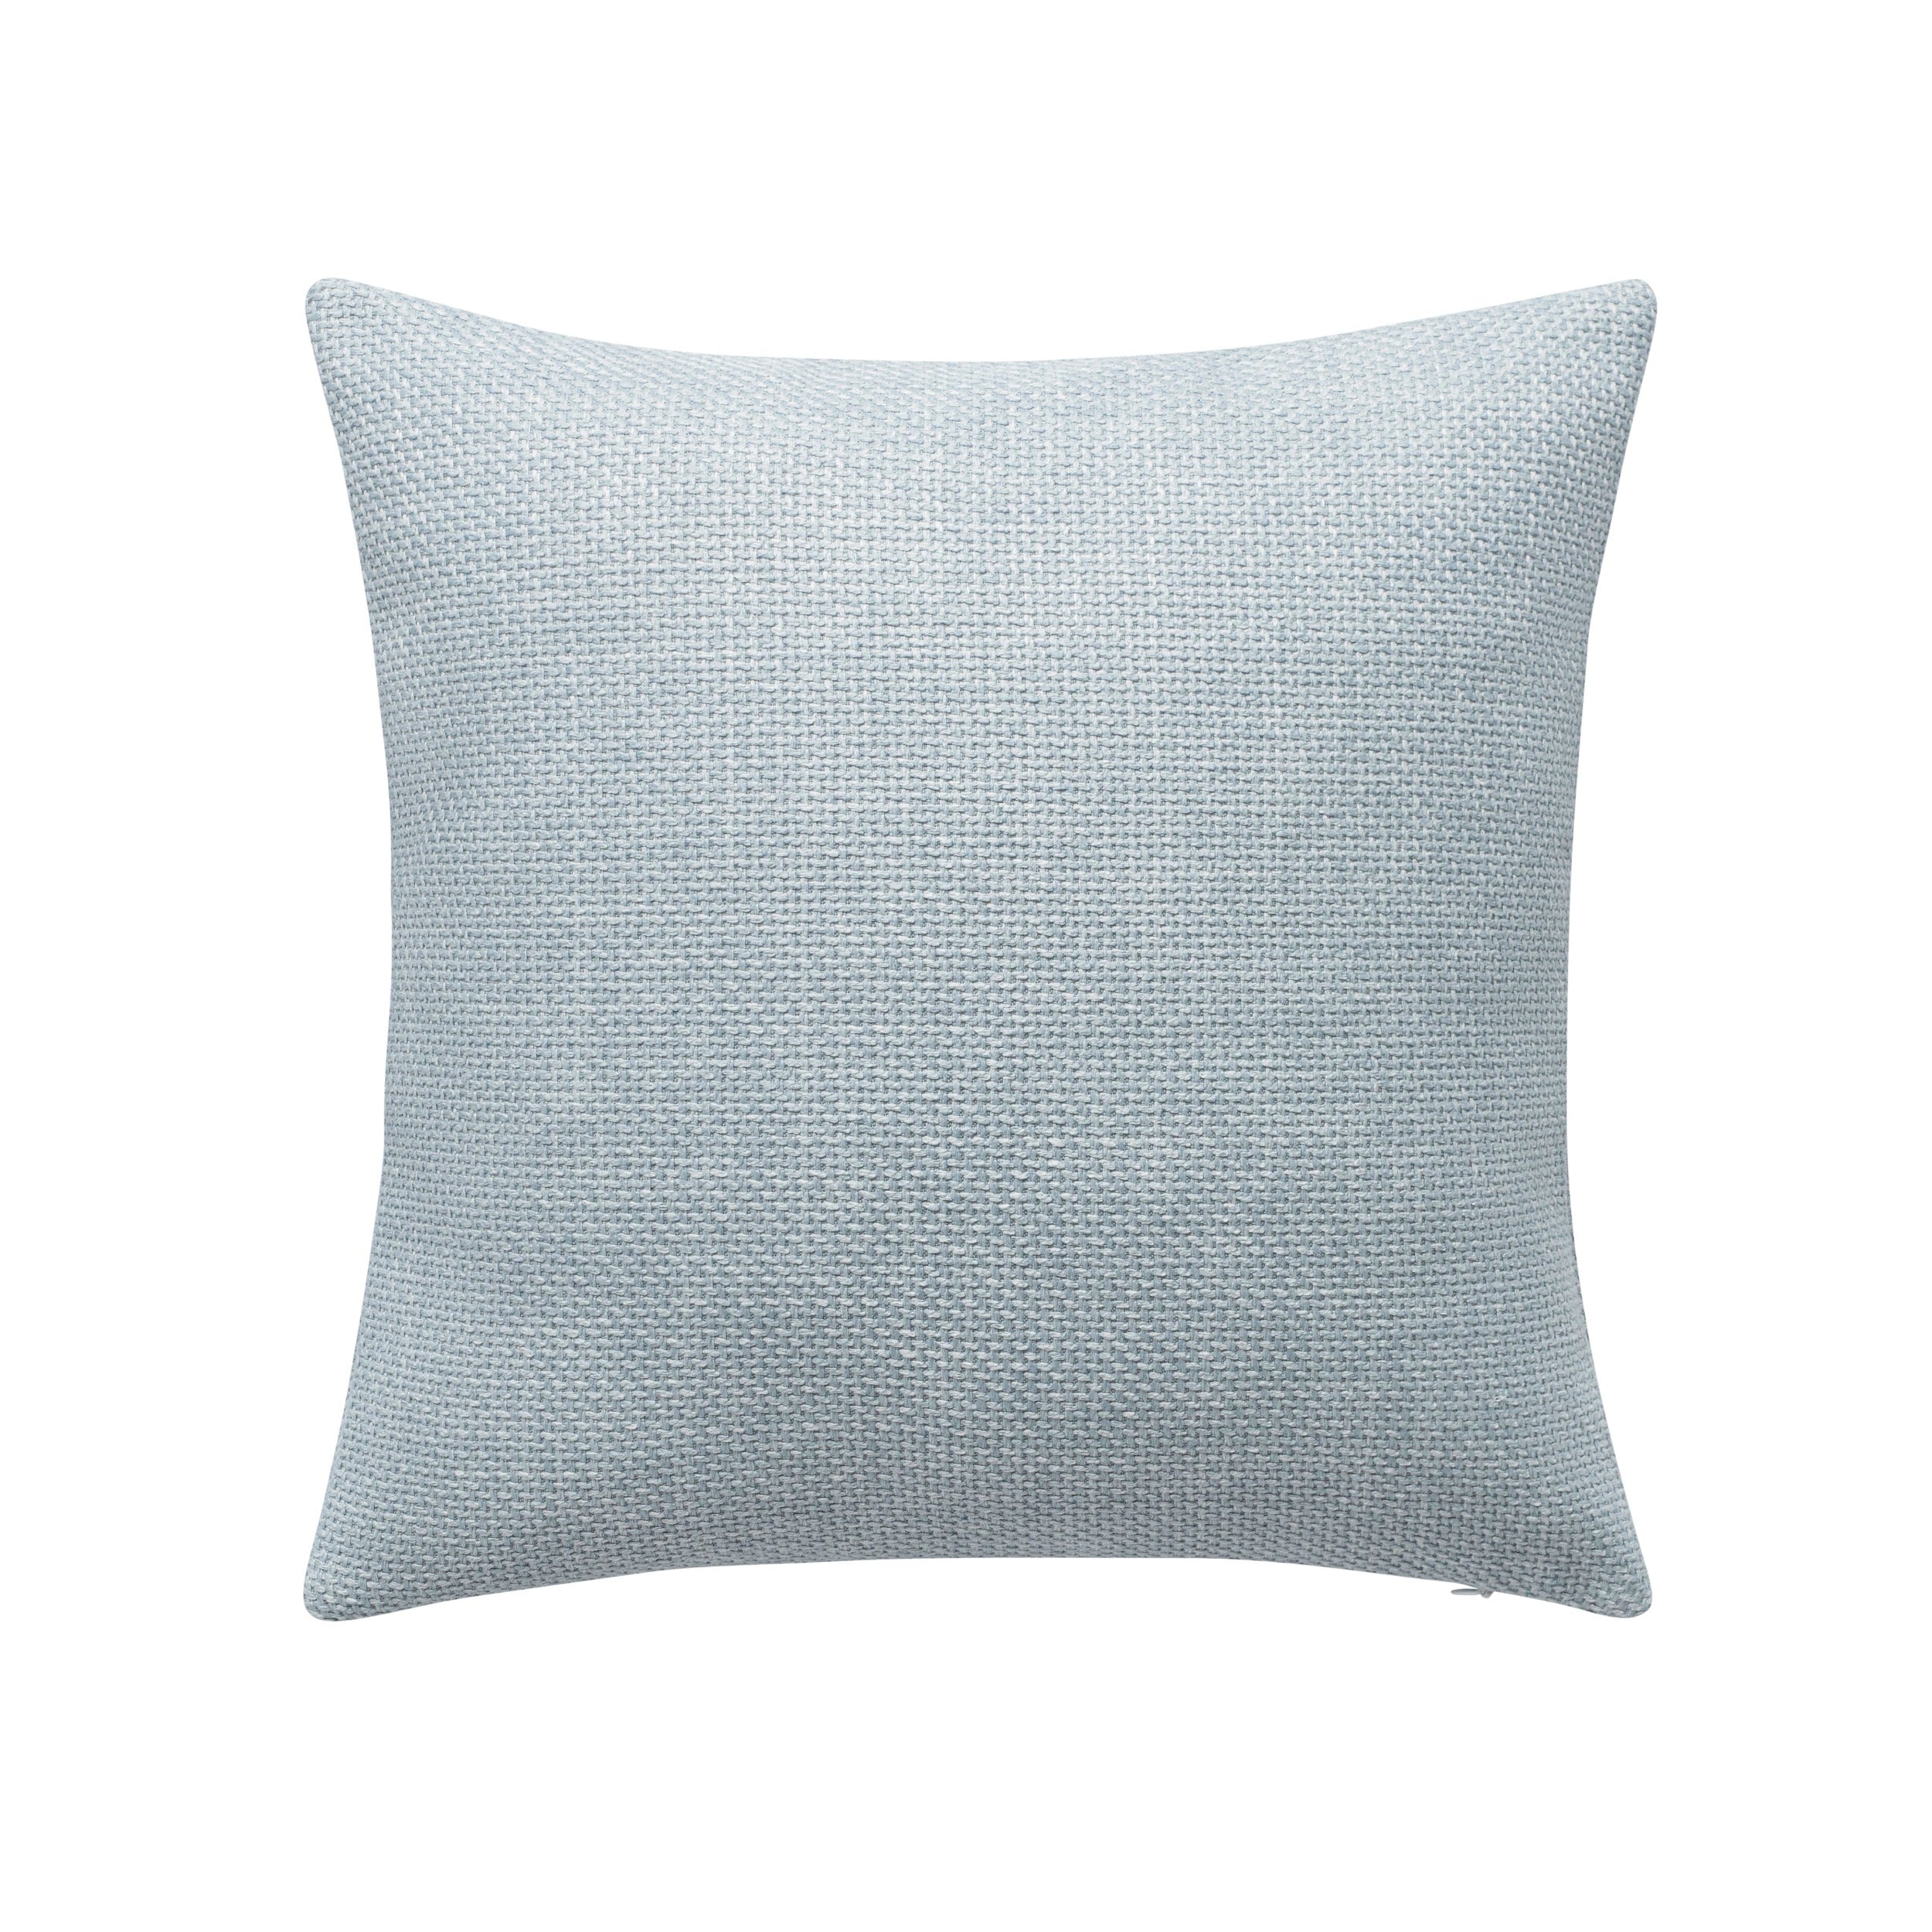 Petite Belle Sky Blue Textured Throw Pillow with White Piping